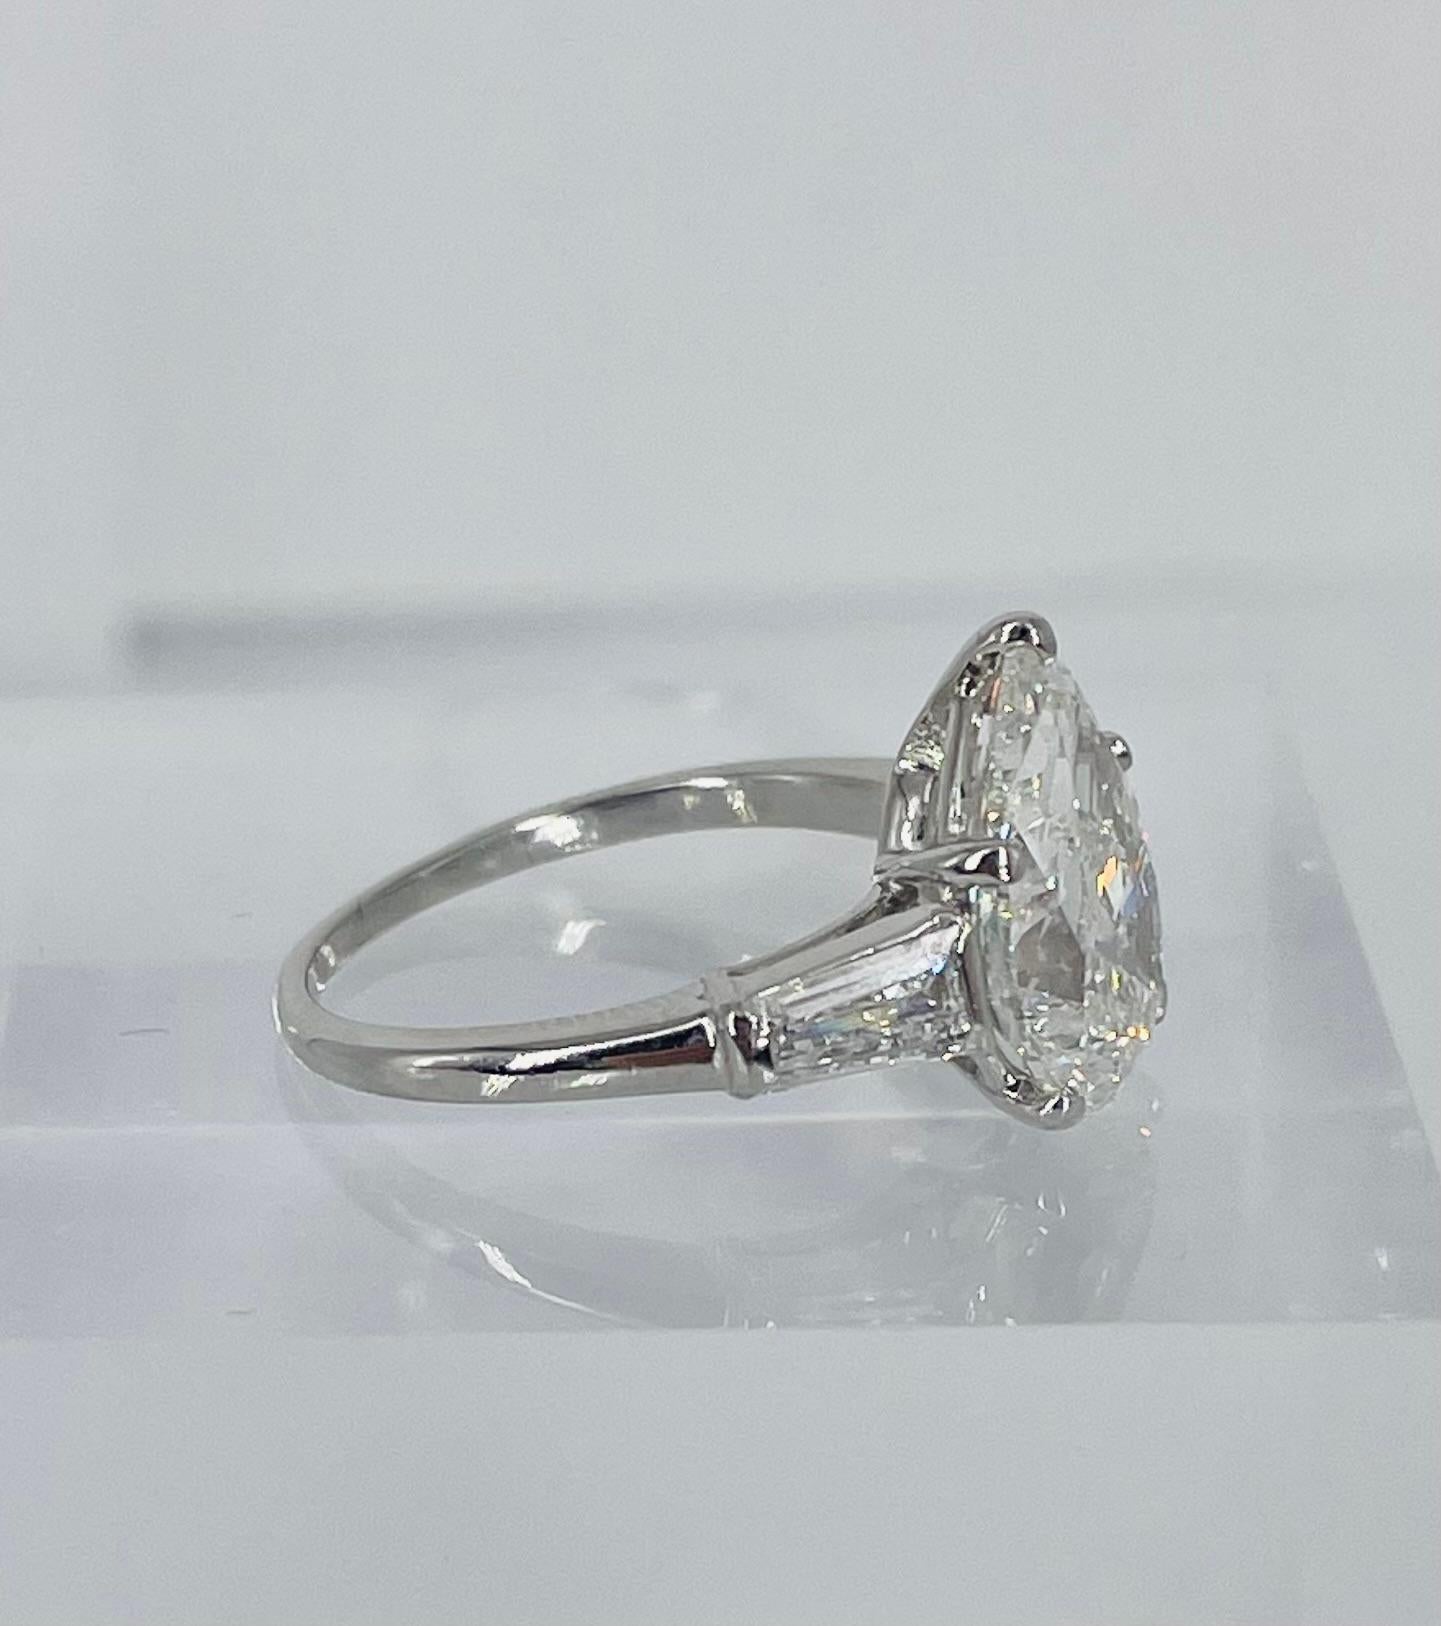 A timeless classic, this three stone engagement ring by J. Birnbach is a lovely statement piece. The center diamond is a GIA certified 3.02 carat pear shape, with H color and SI2 clarity. This pear shape has a gorgeous full proportion, making it